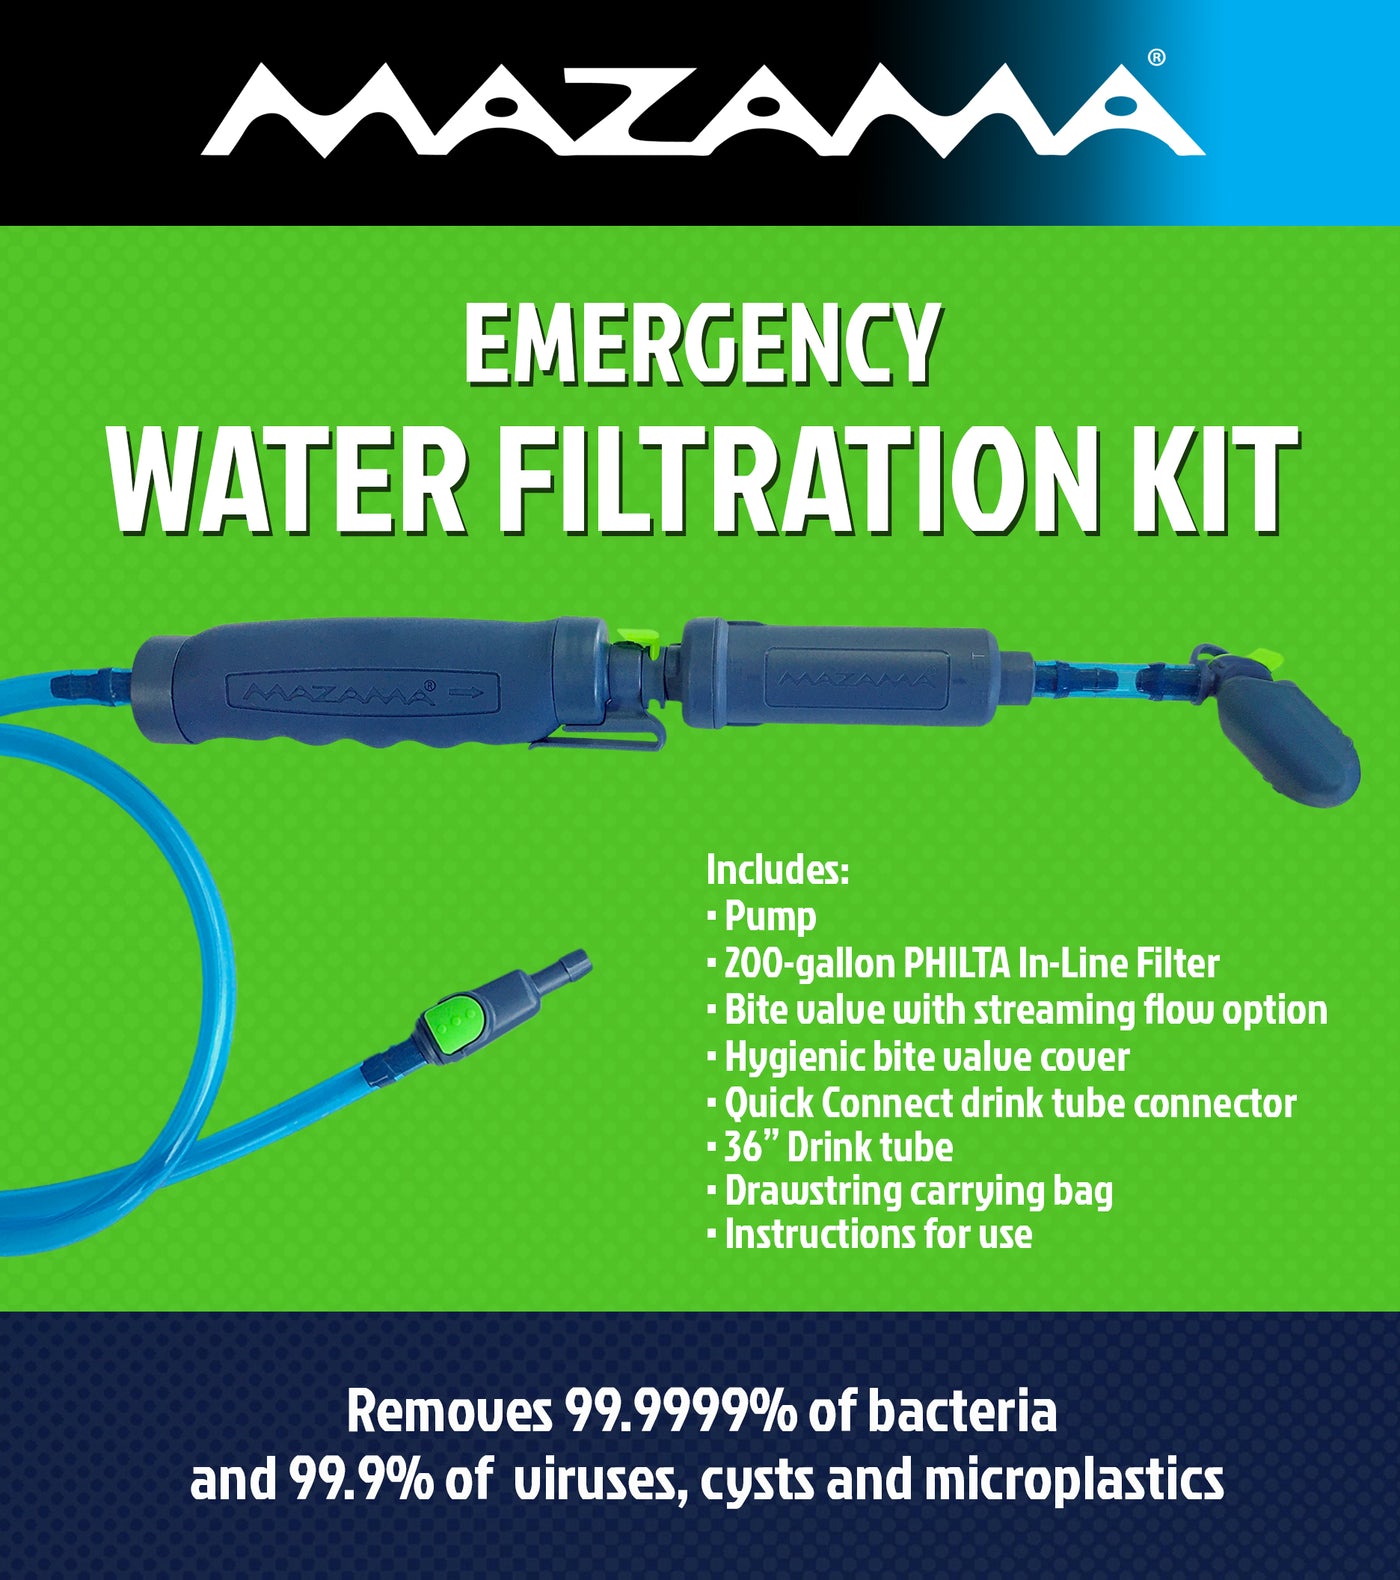 Personal Water Filtration Kit